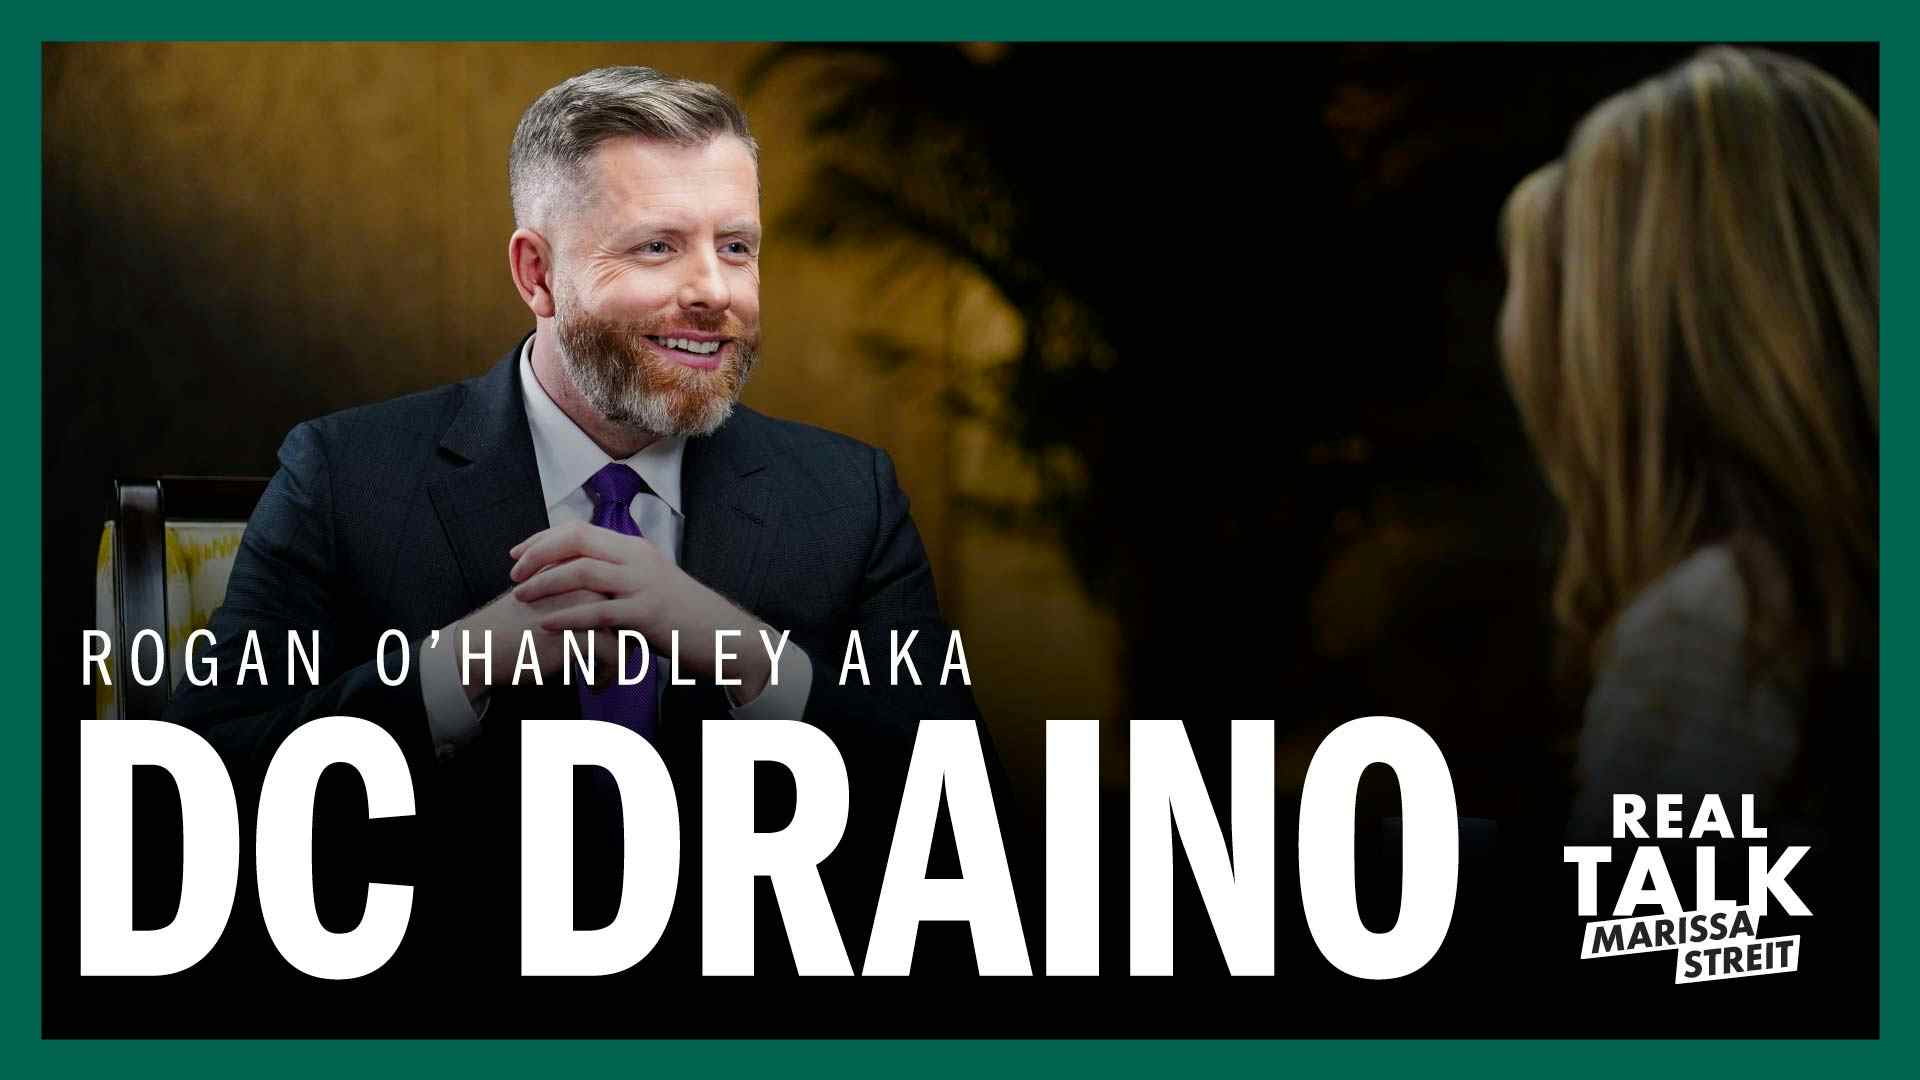 DC Draino on a TikTok Ban and Who We Can Trust for News